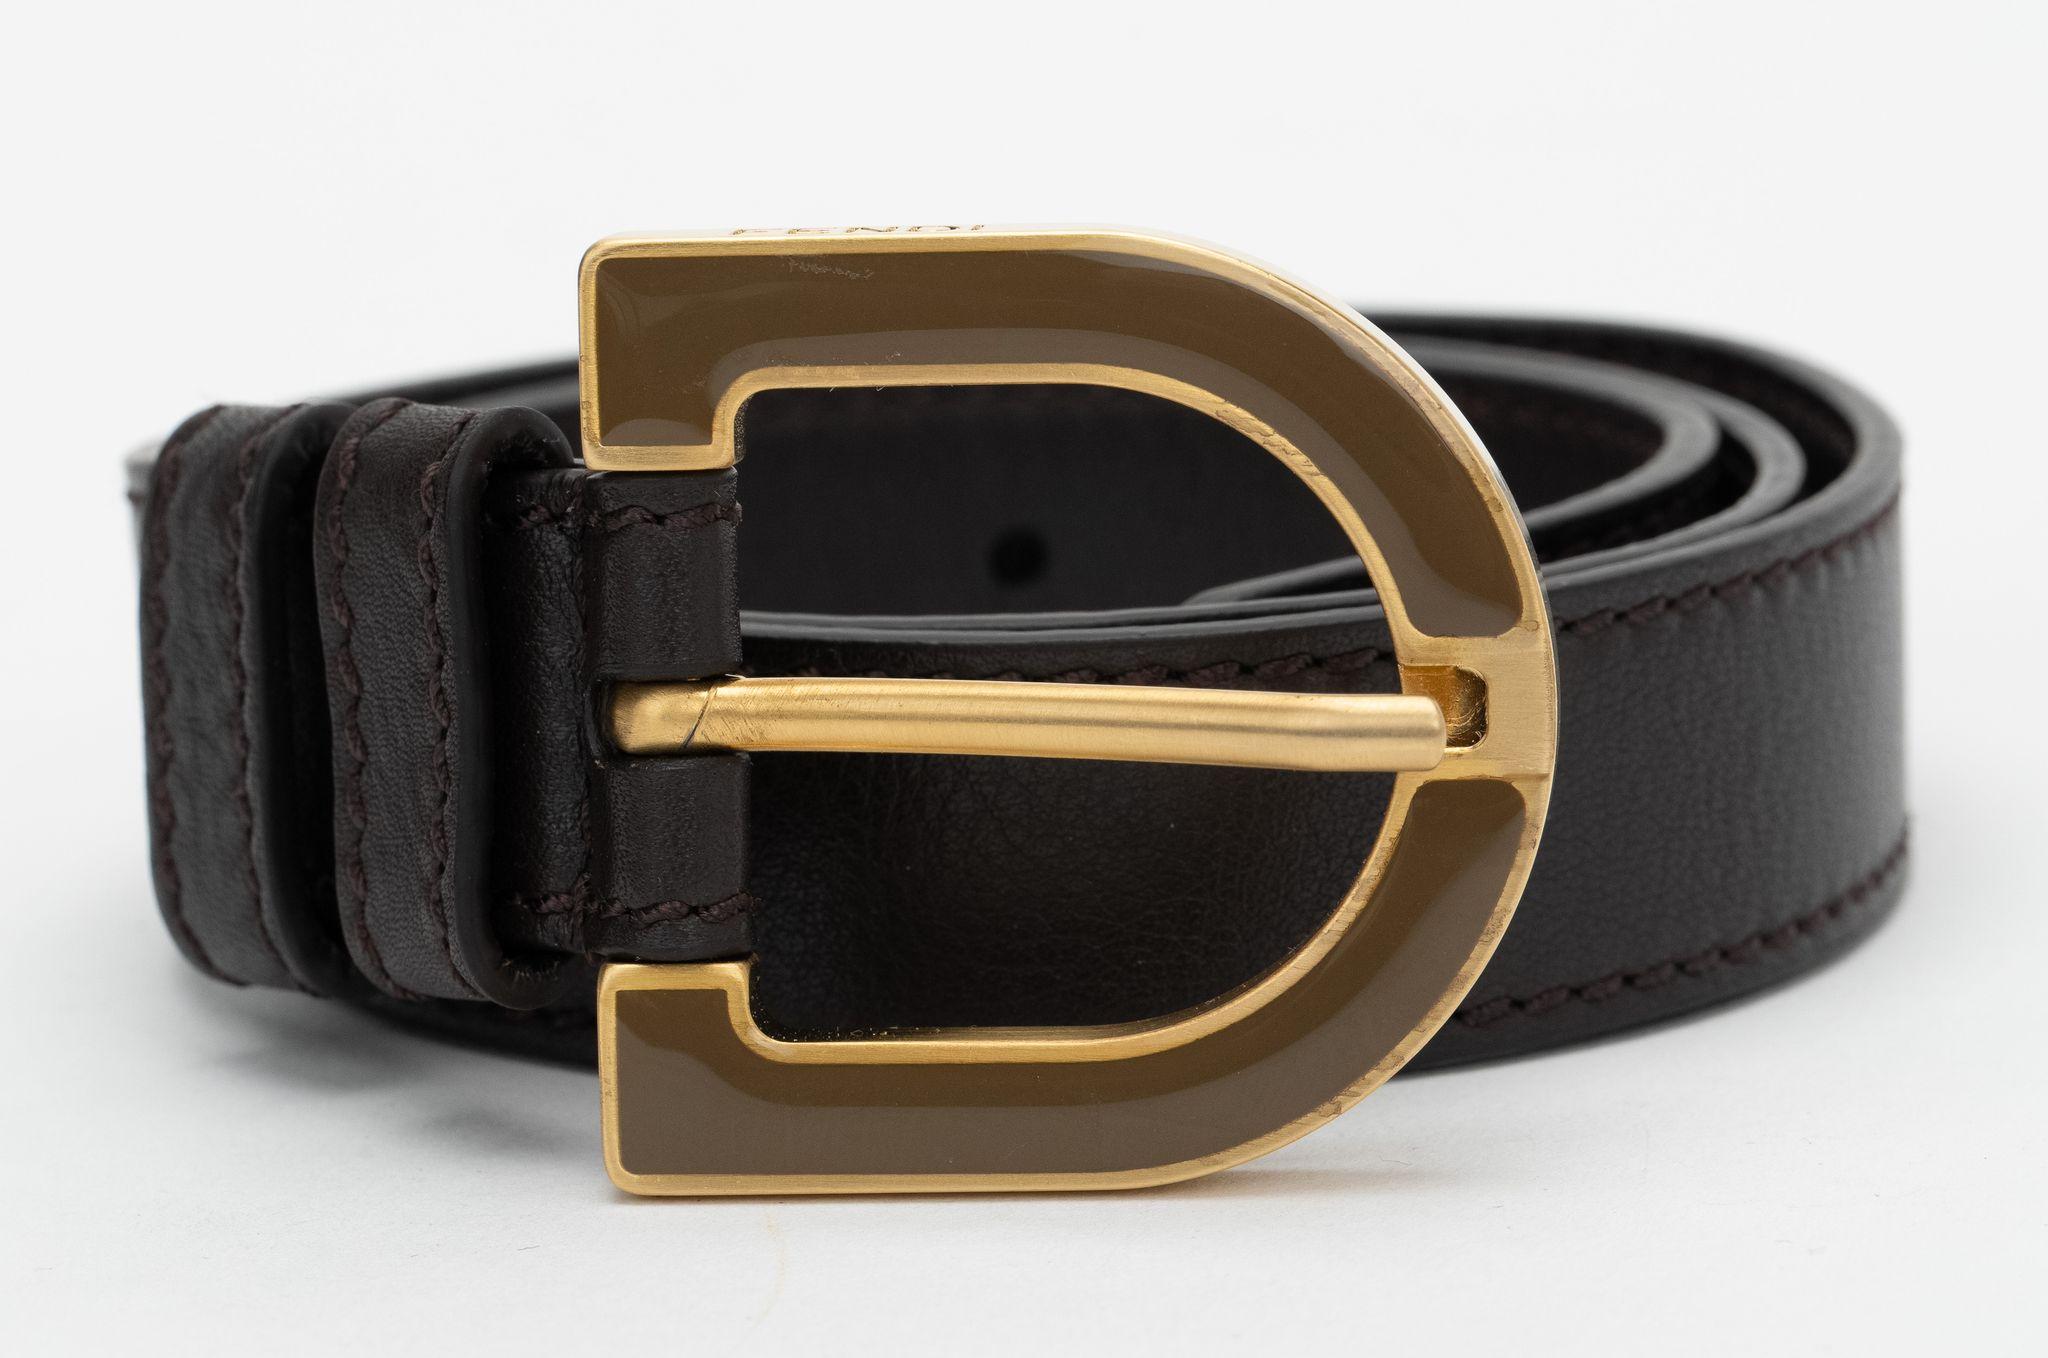 Fendi Brown leather Belt with gold plated and brown buckle, 83 cm .
New with original dust cover.